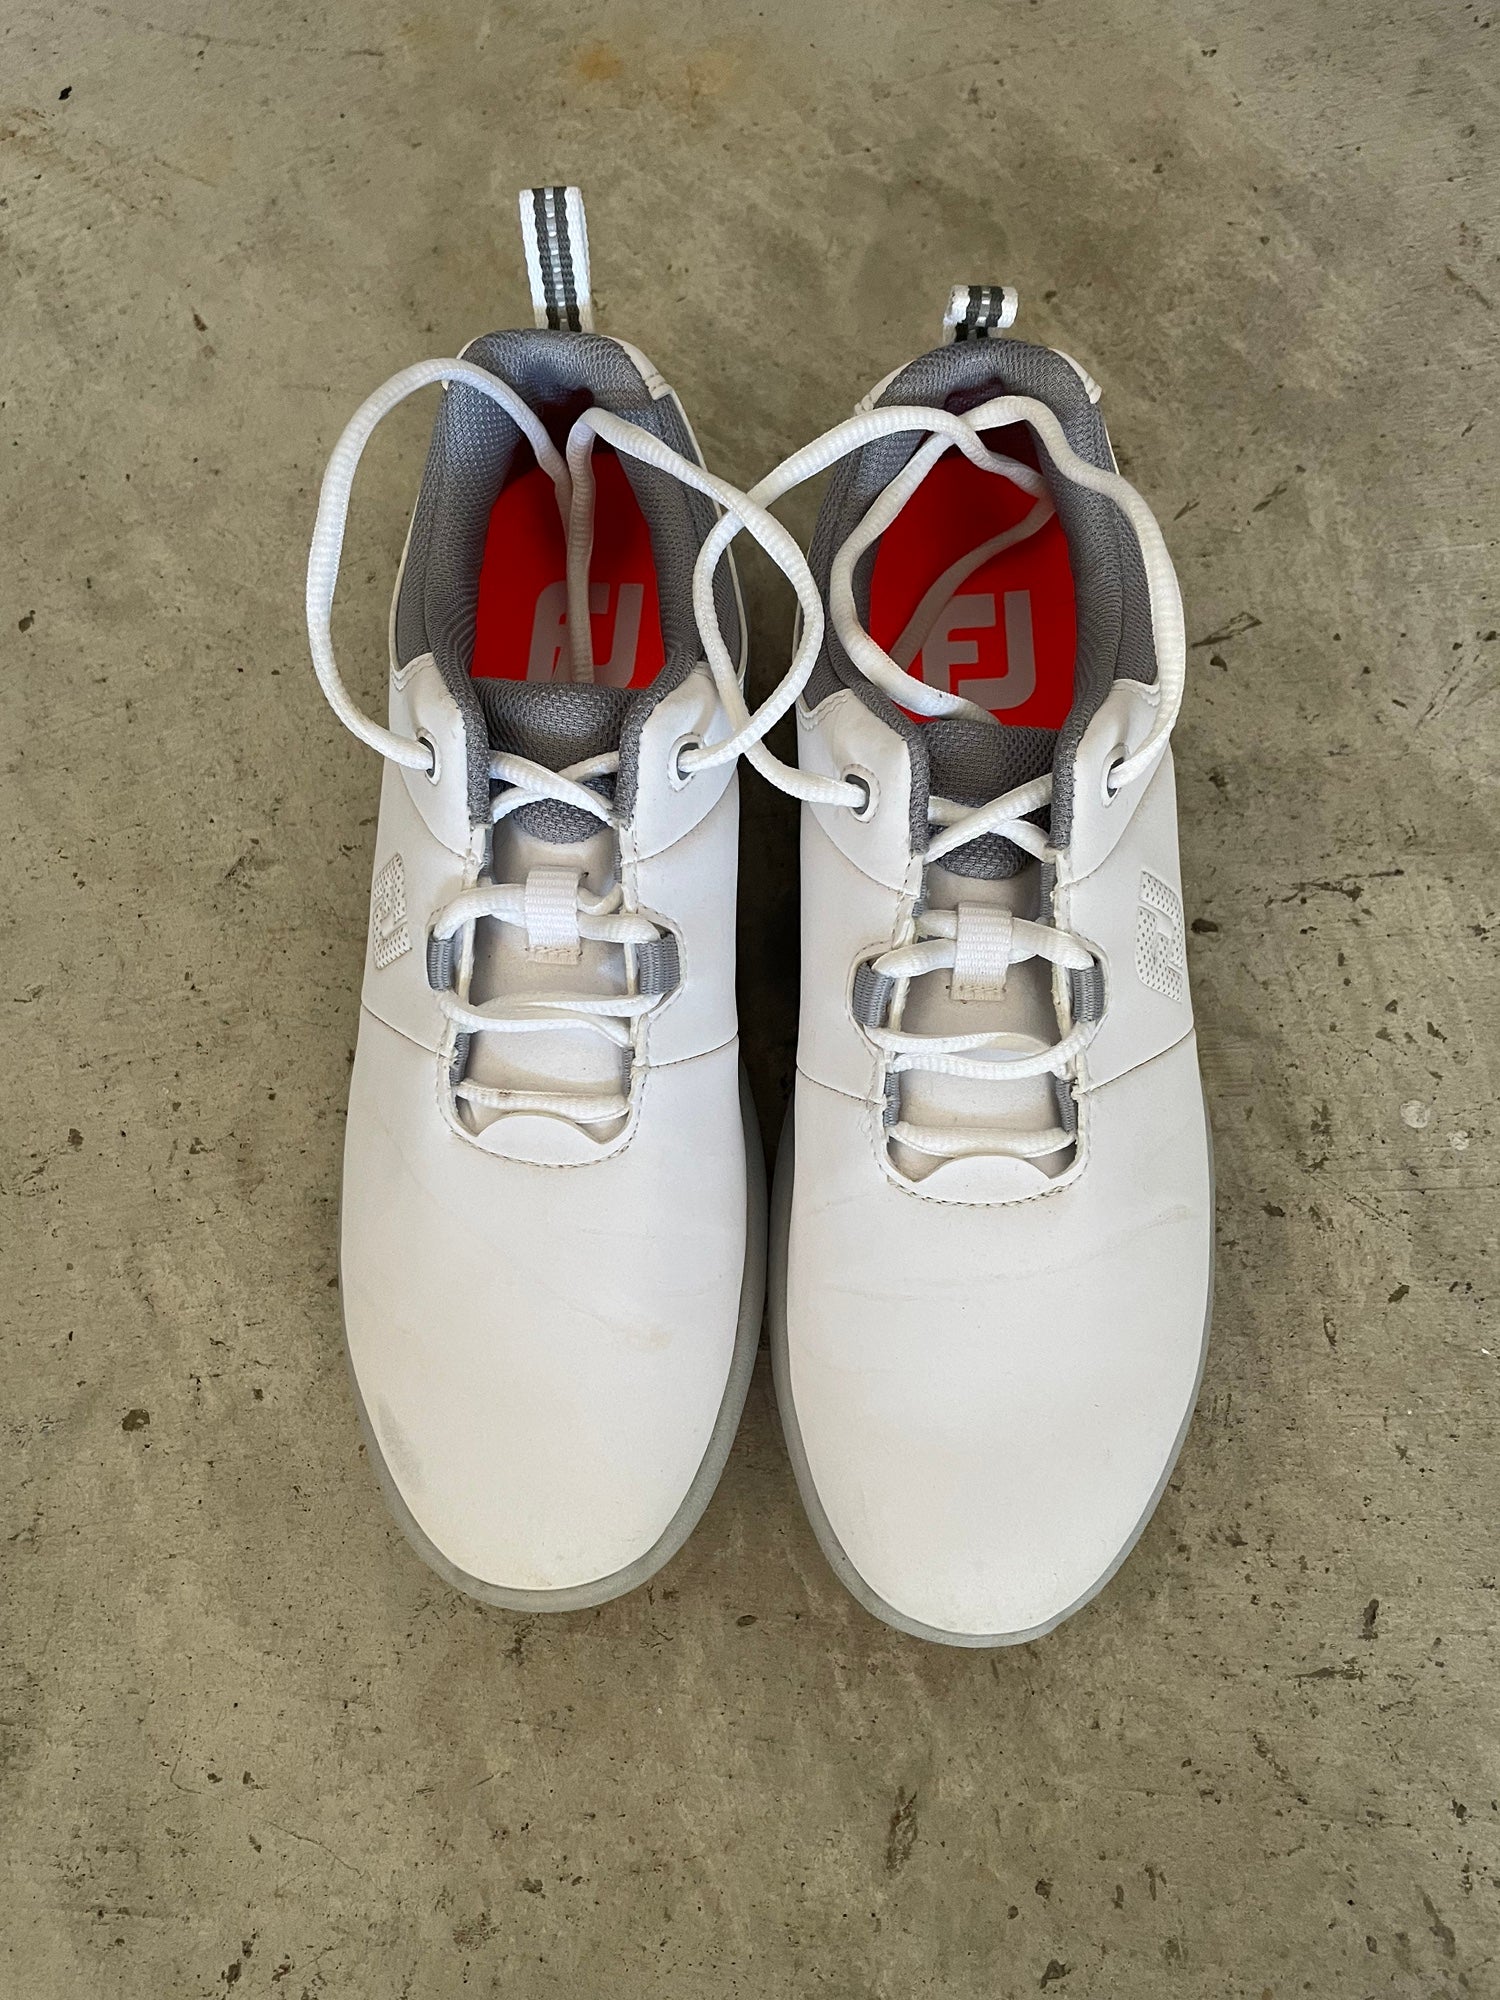 Footjoy Classics Dry Premiere Golf Shoes | Used and New on